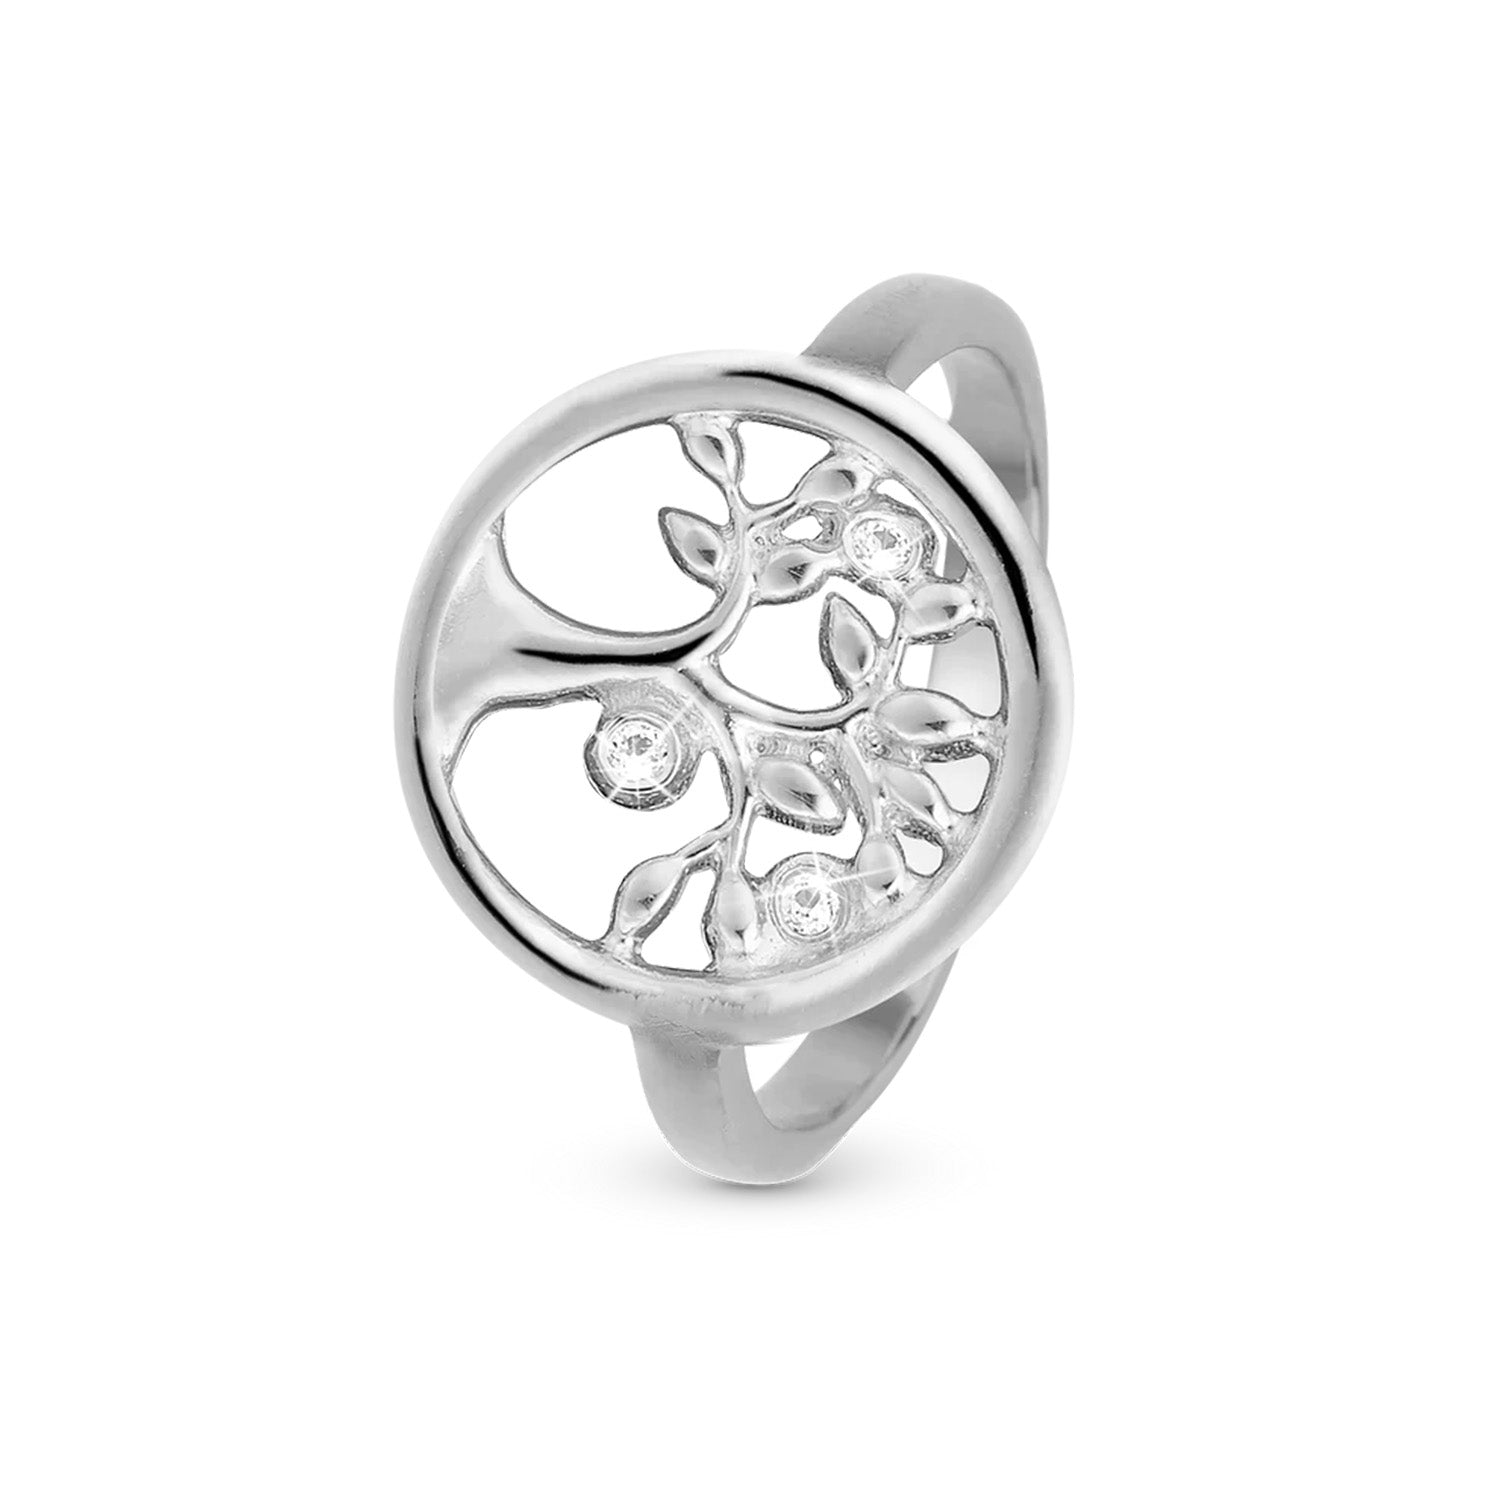 Christina Design London Jewelry & Watches - Tree Of Life Ring sølv 800-3.23.A